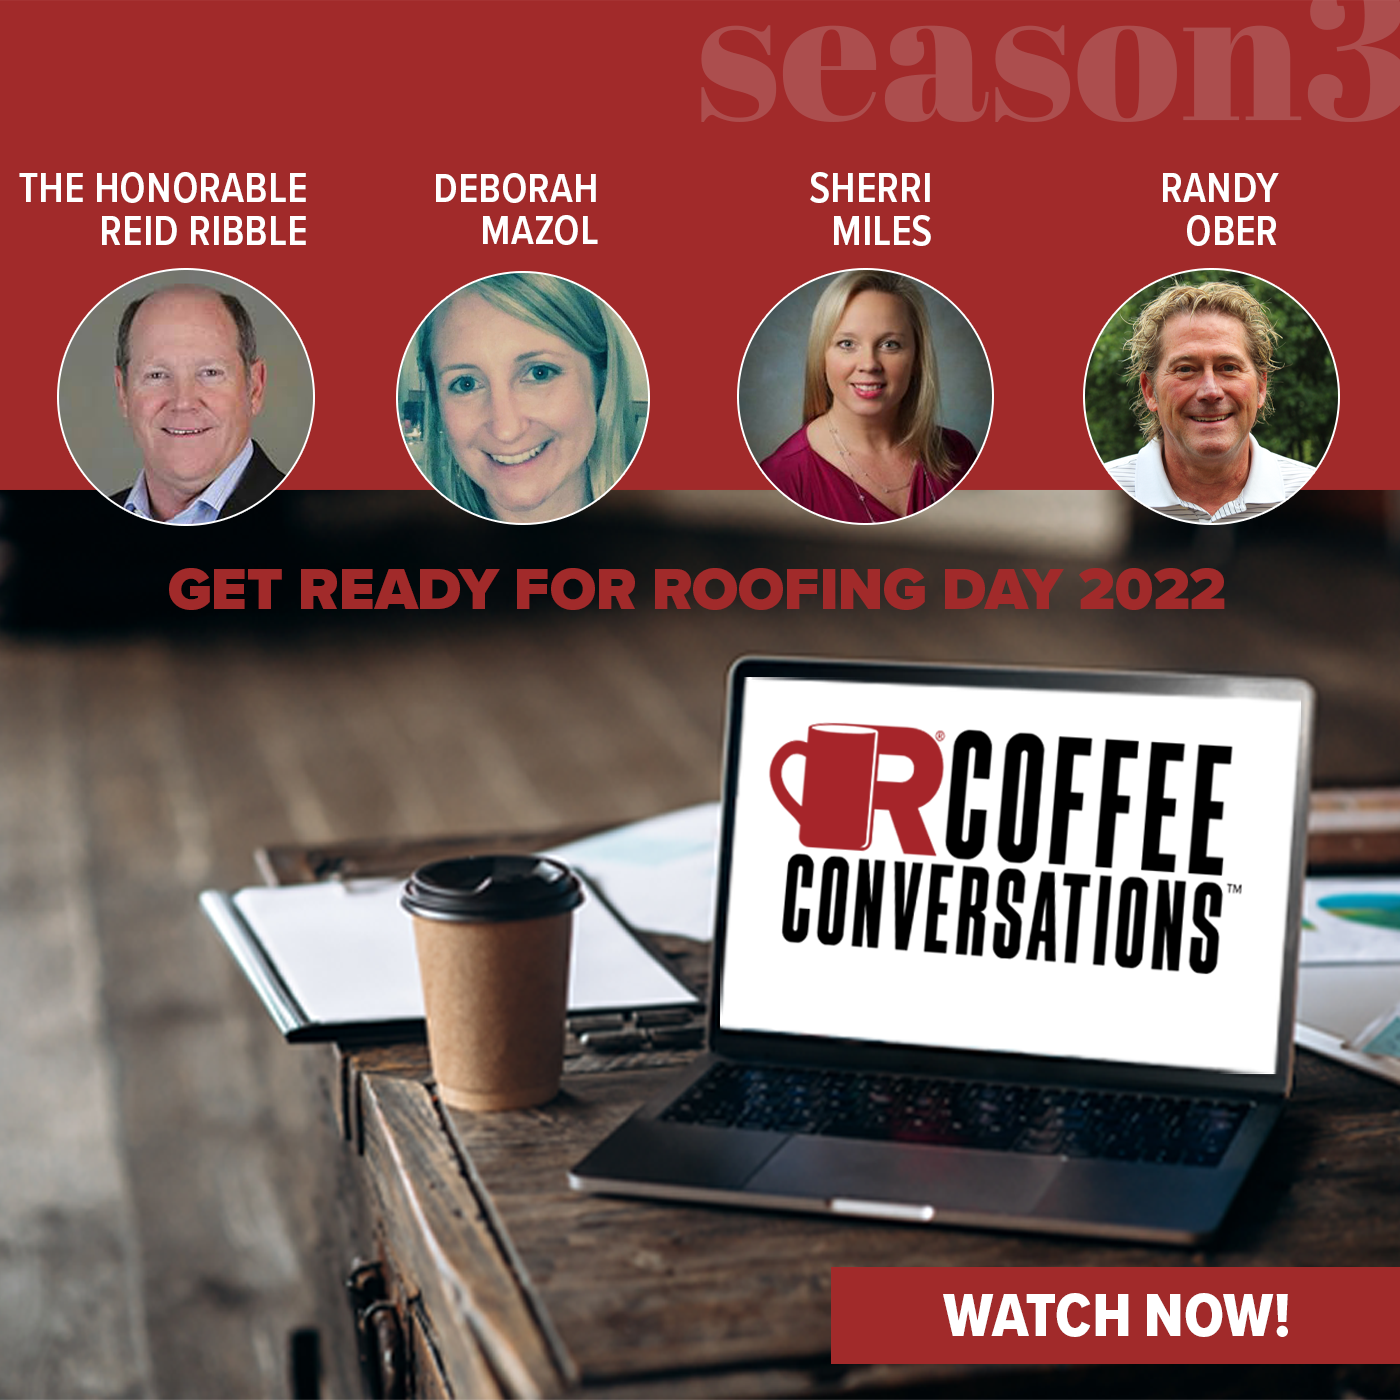 ROOFPAC - Coffee Conversations -  Get Ready for Roofing Day 2022